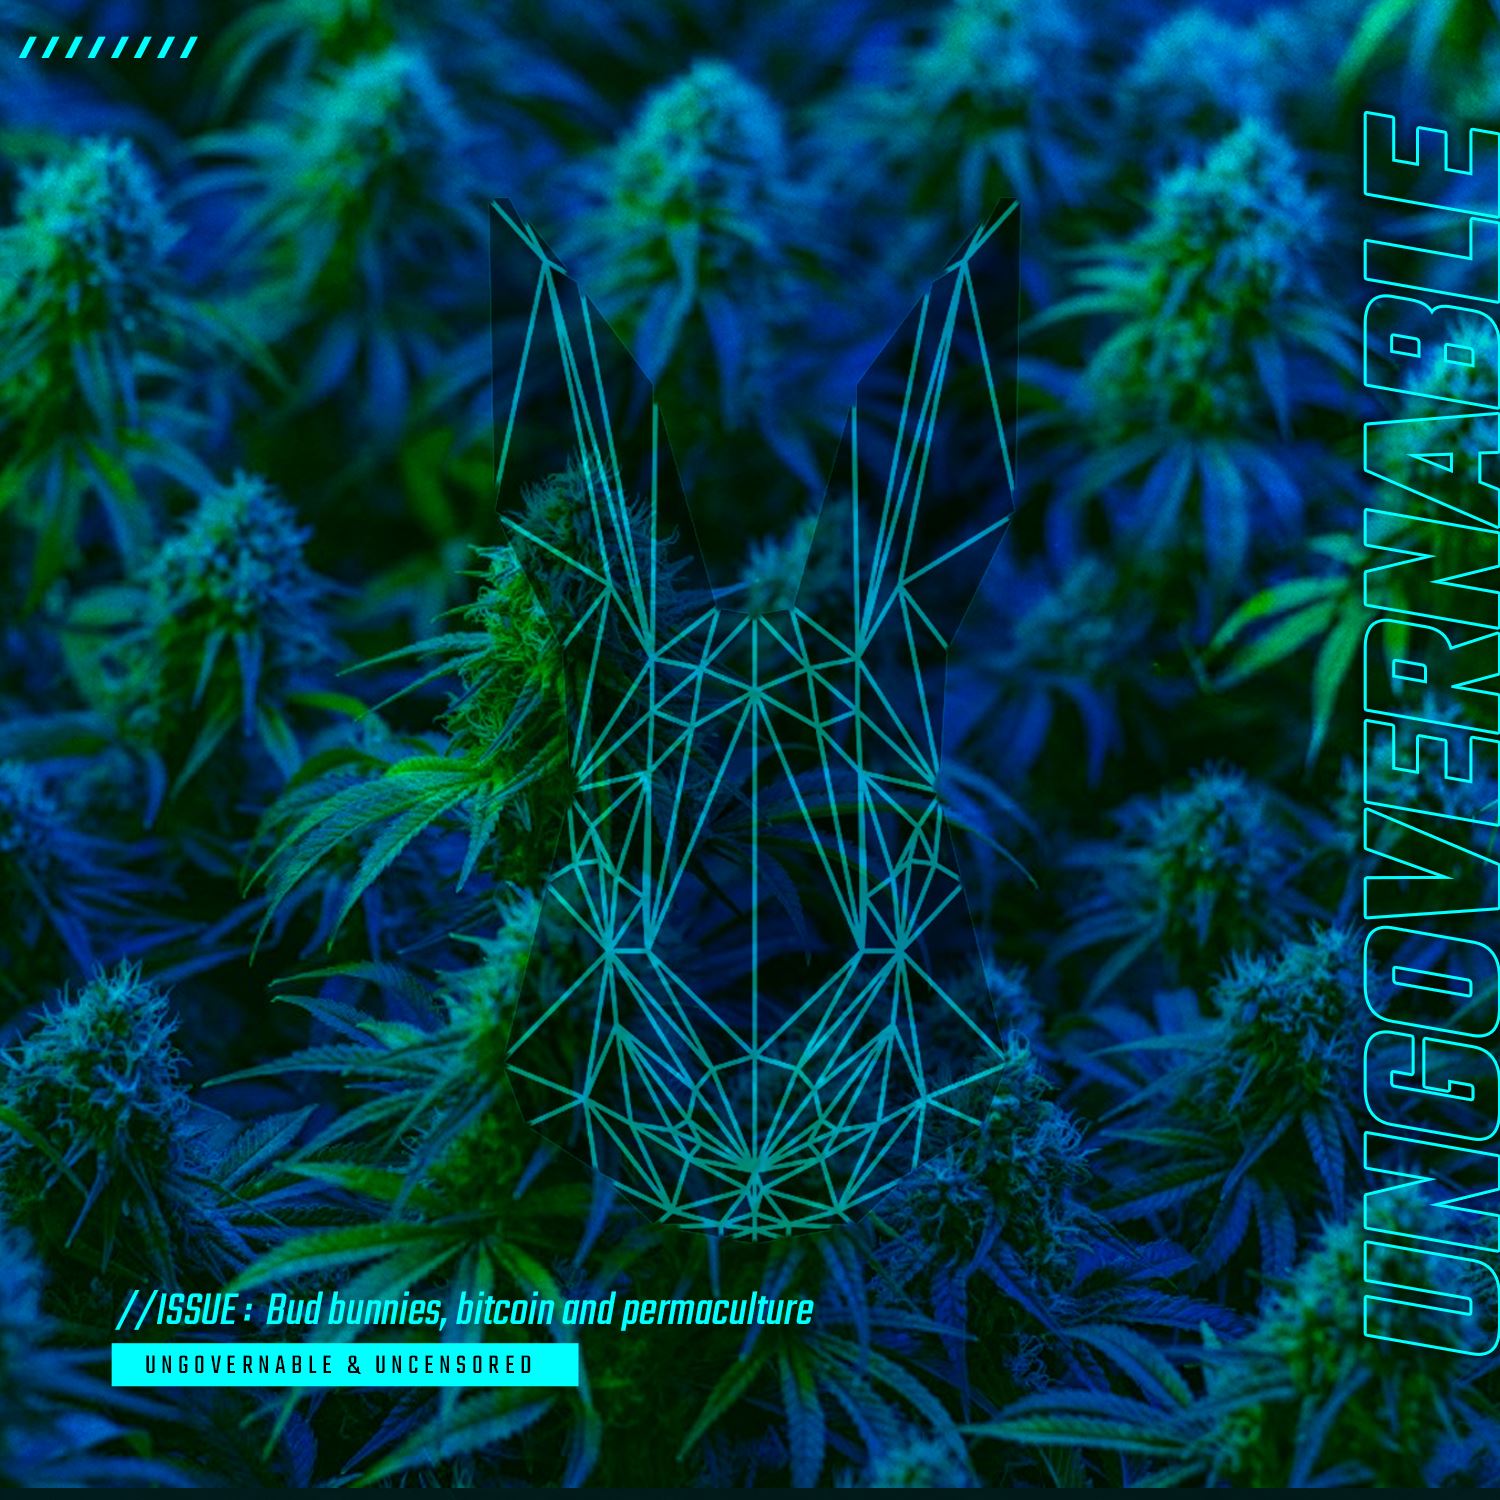 Bud bunnies, bitcoin and permaculture